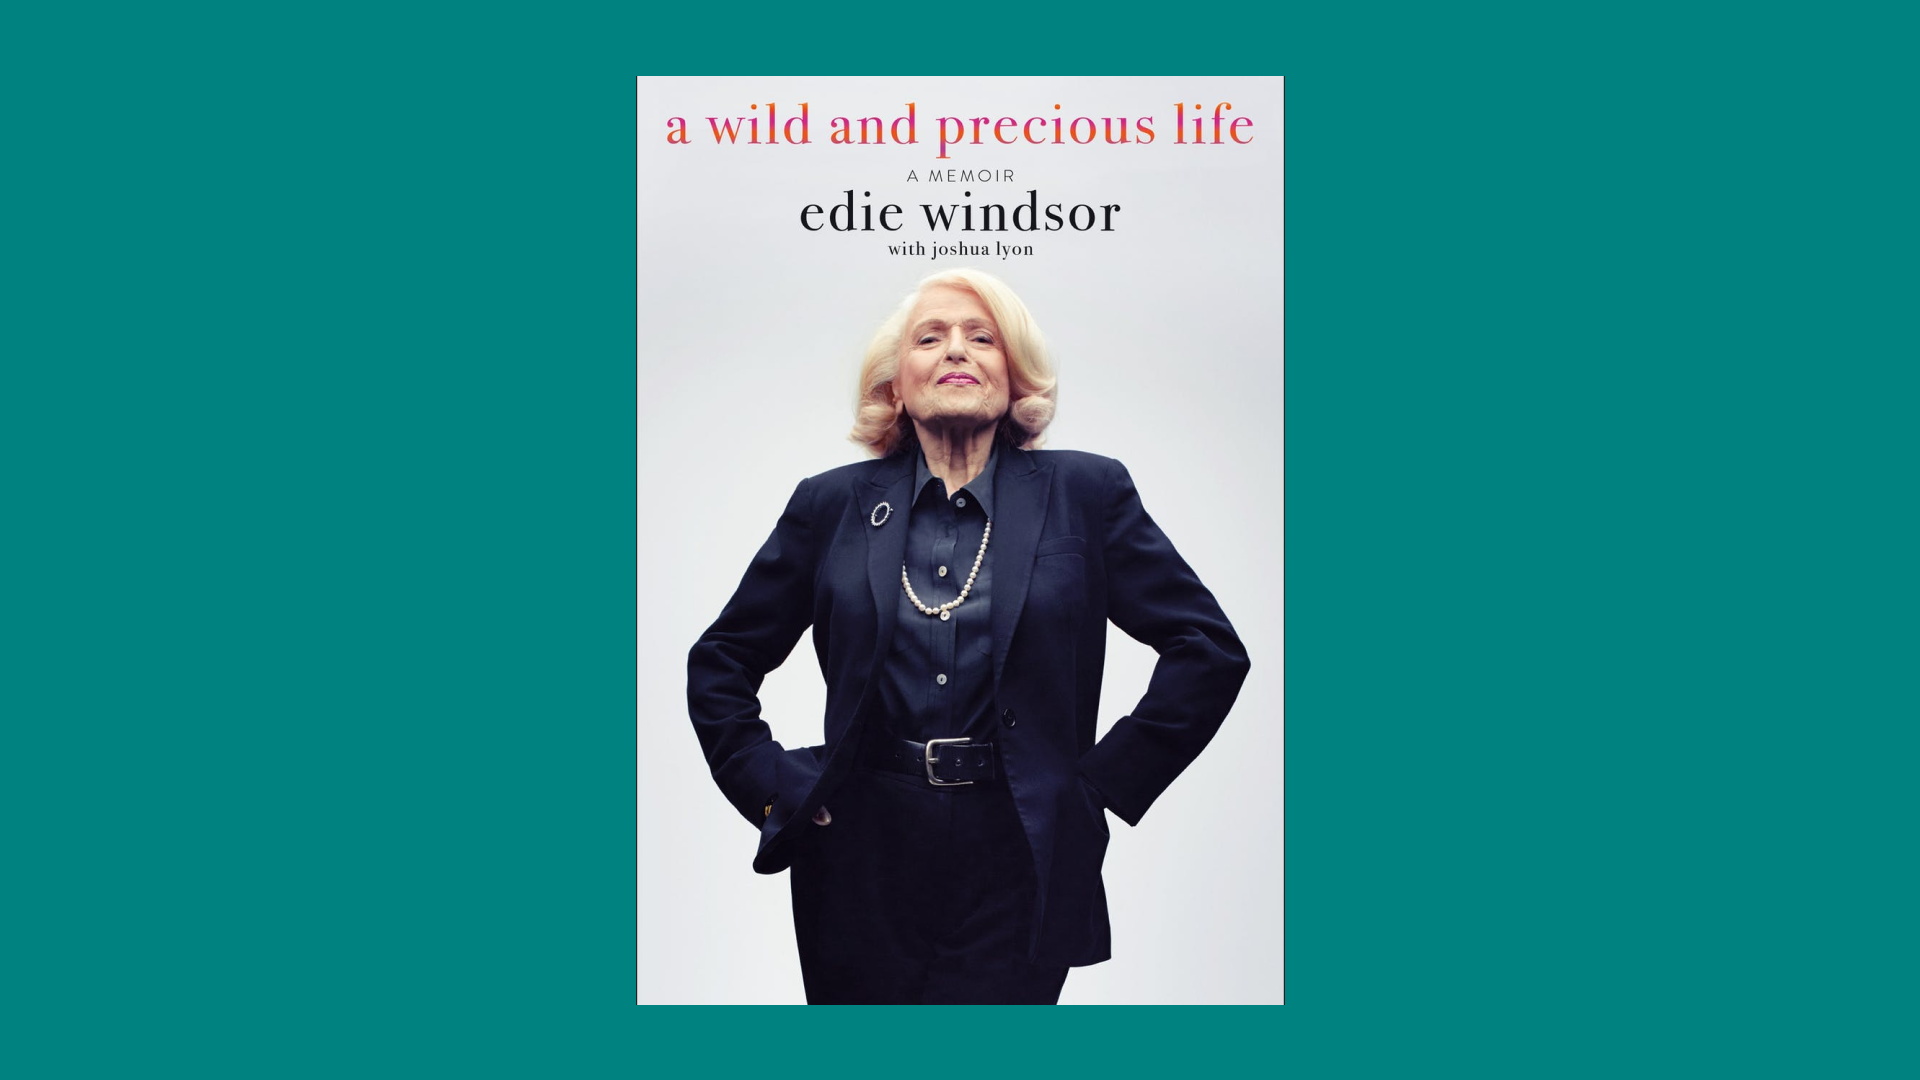 “A Wild and Precious Life” by Edie Windsor with Joshua Lyon